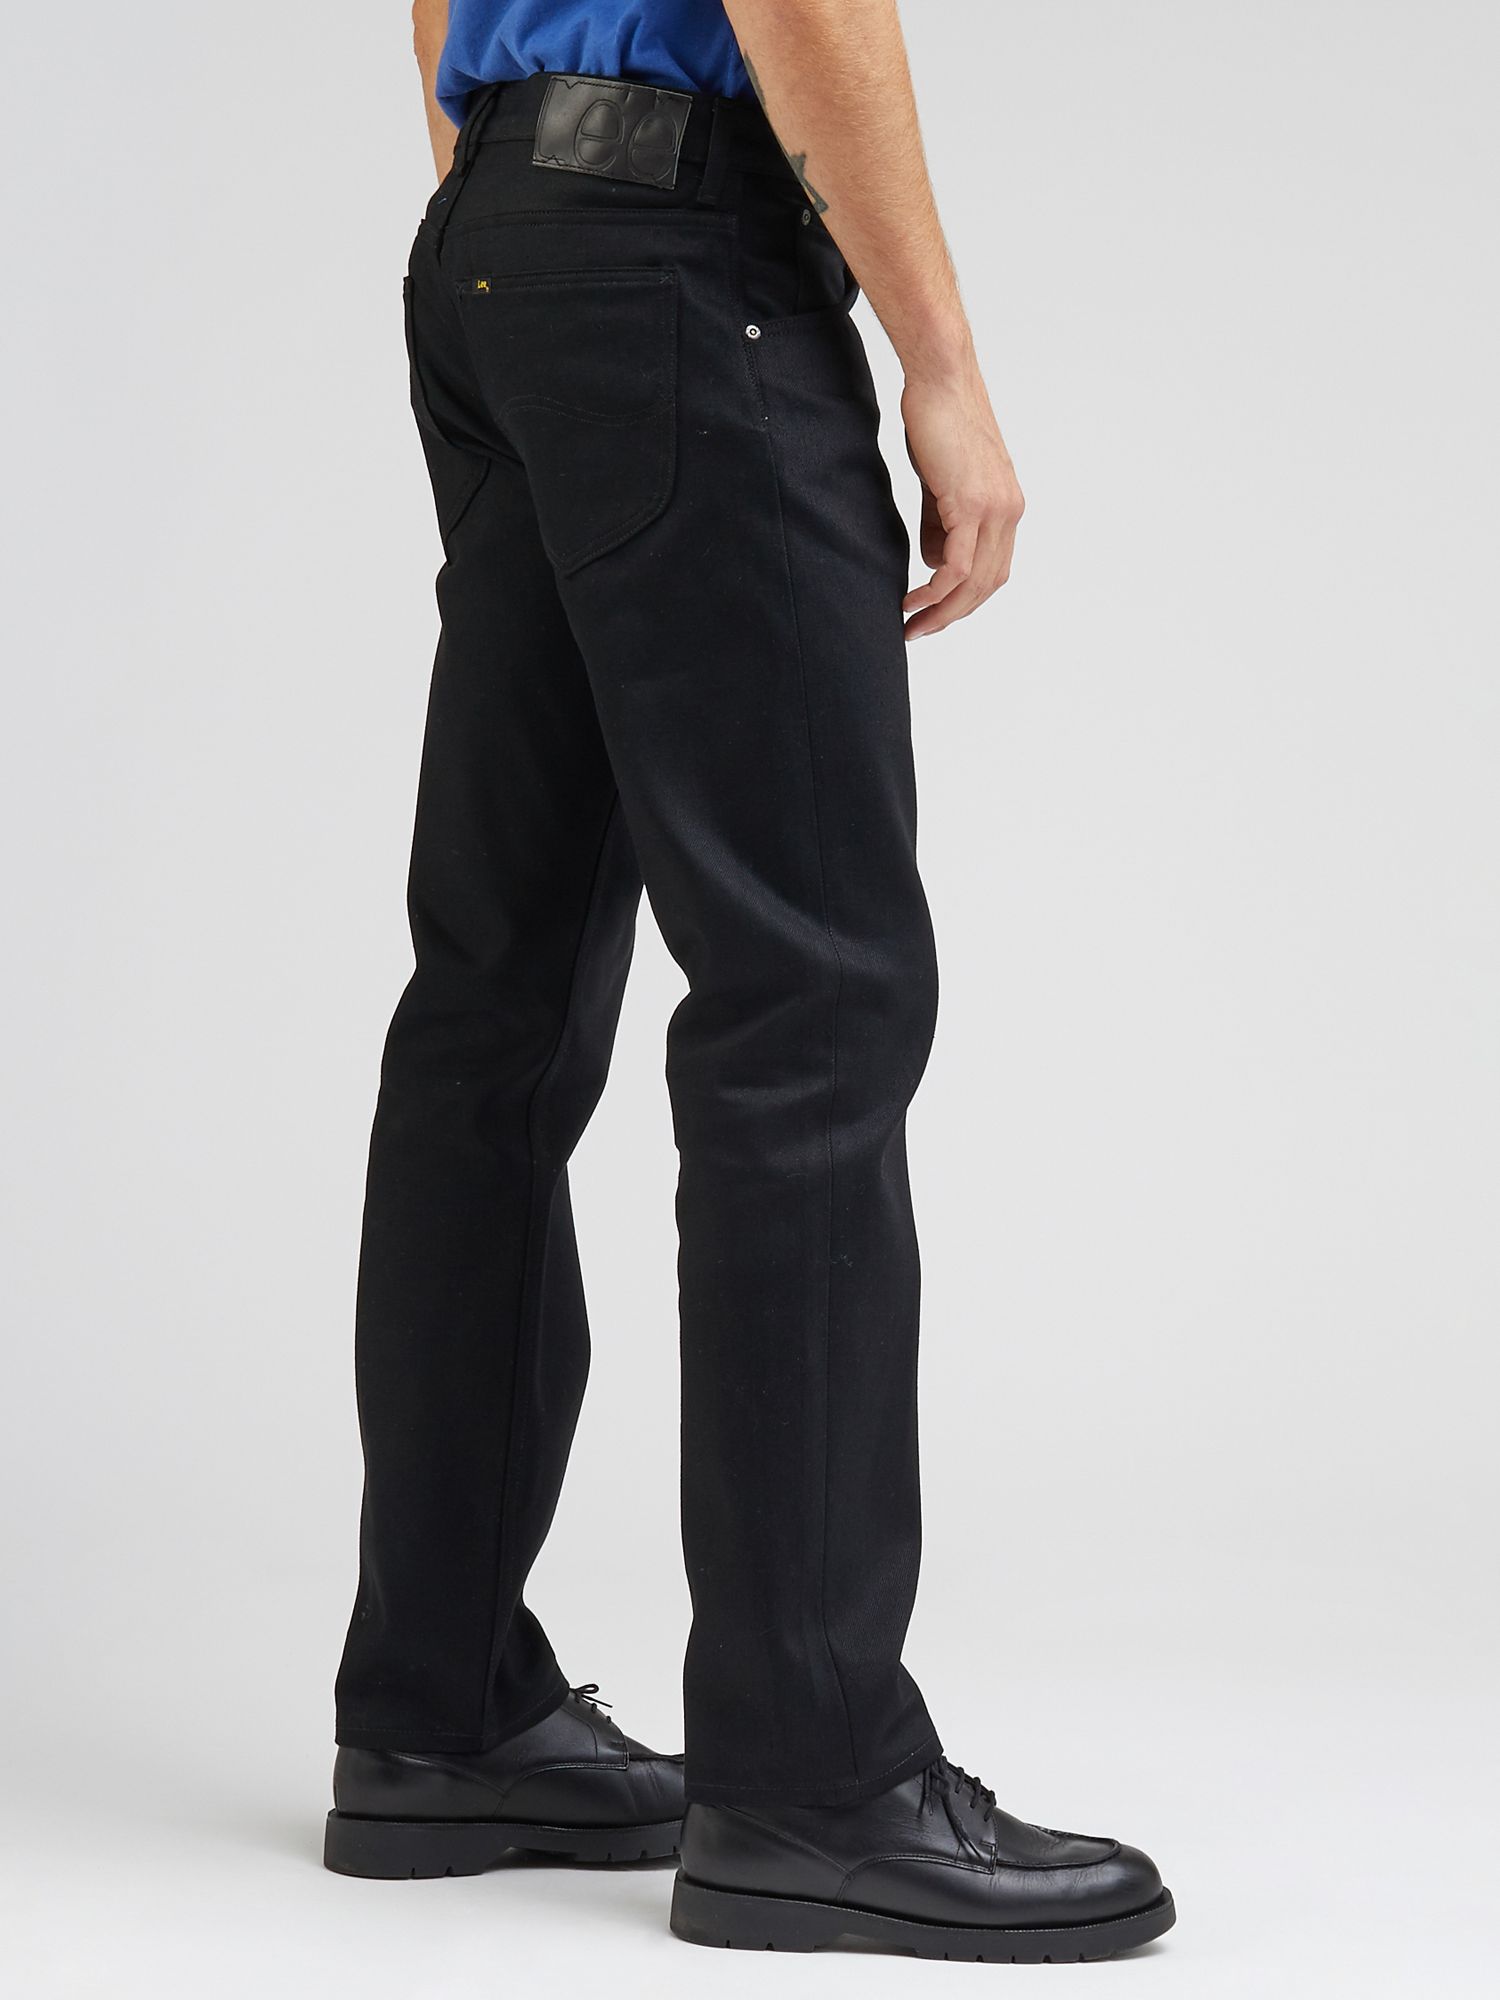 Lee Authentic 101 Zip Fly Relaxed Fit Jeans, Dry Black at John Lewis &  Partners